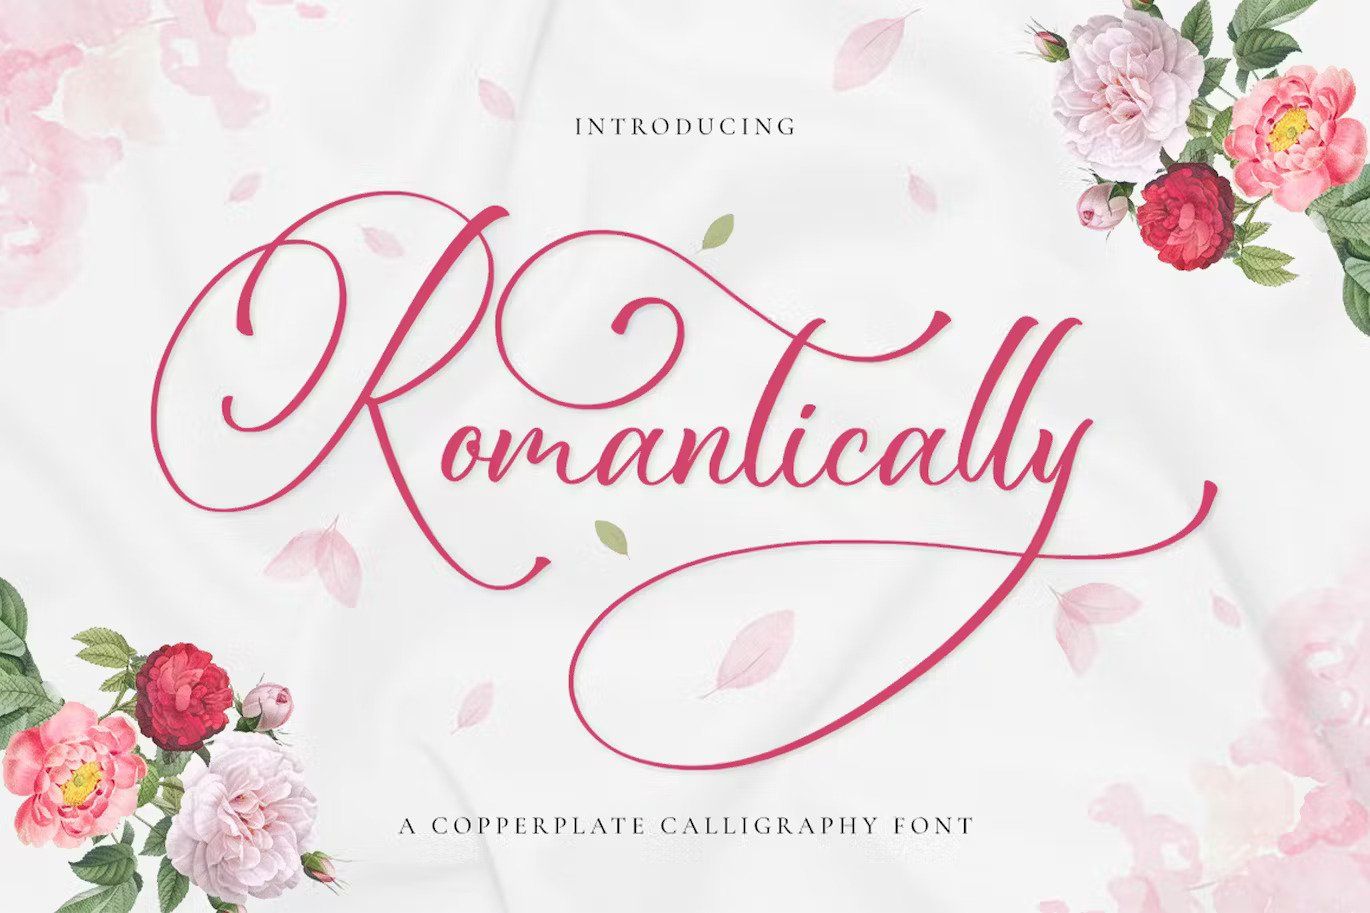 A copperplate calligraphy font